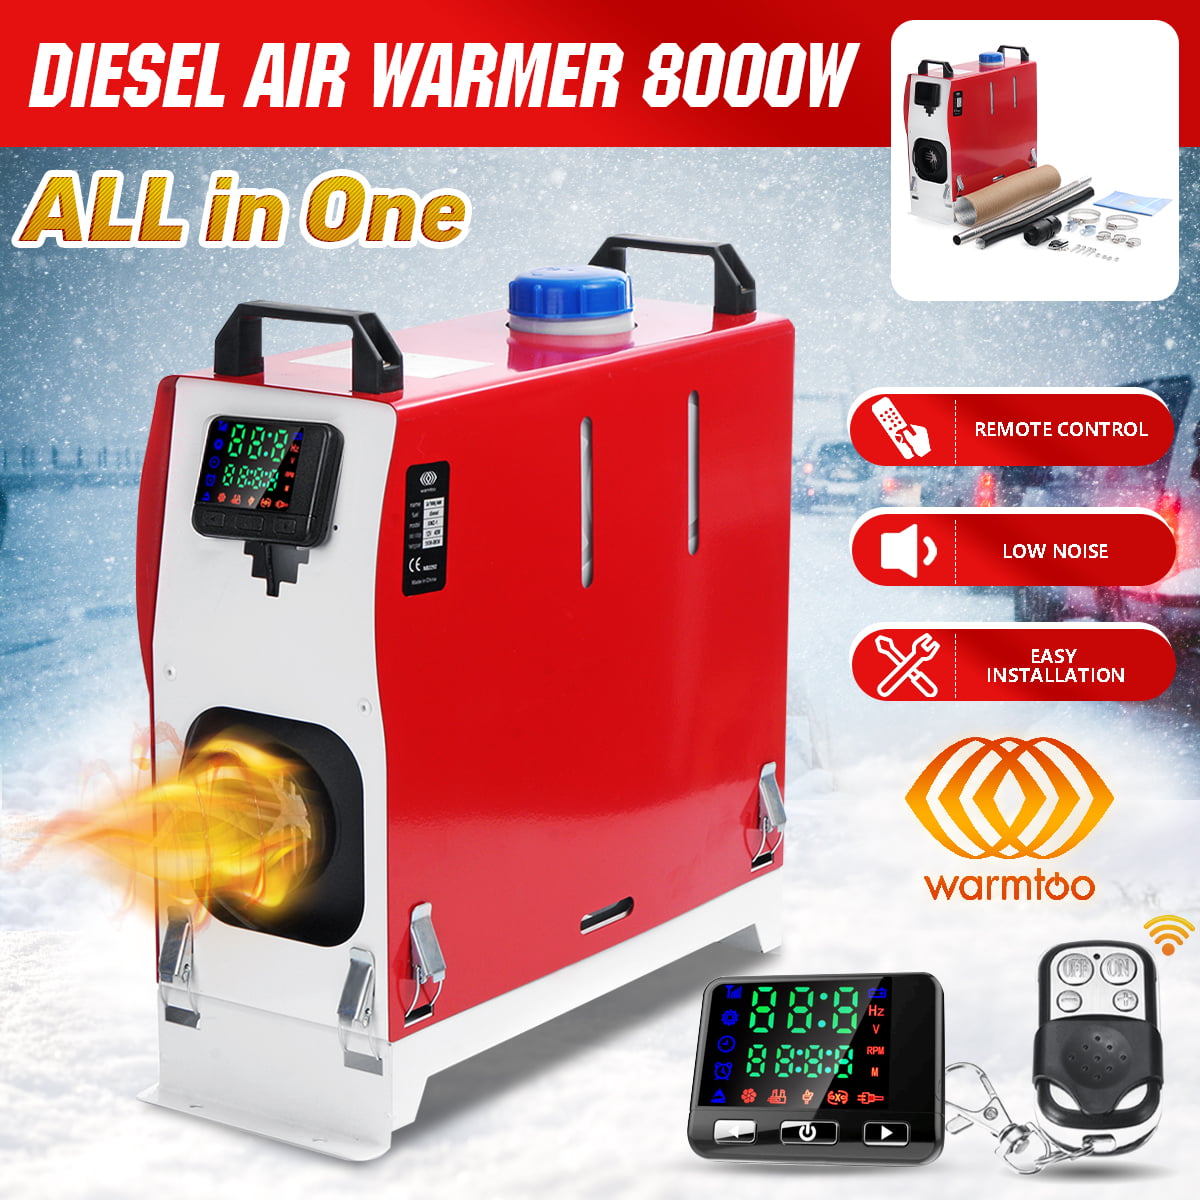 Warmtoo All In One 12V 8KW Metal Diesel Air Heater Car Parking Heater For Trucks 